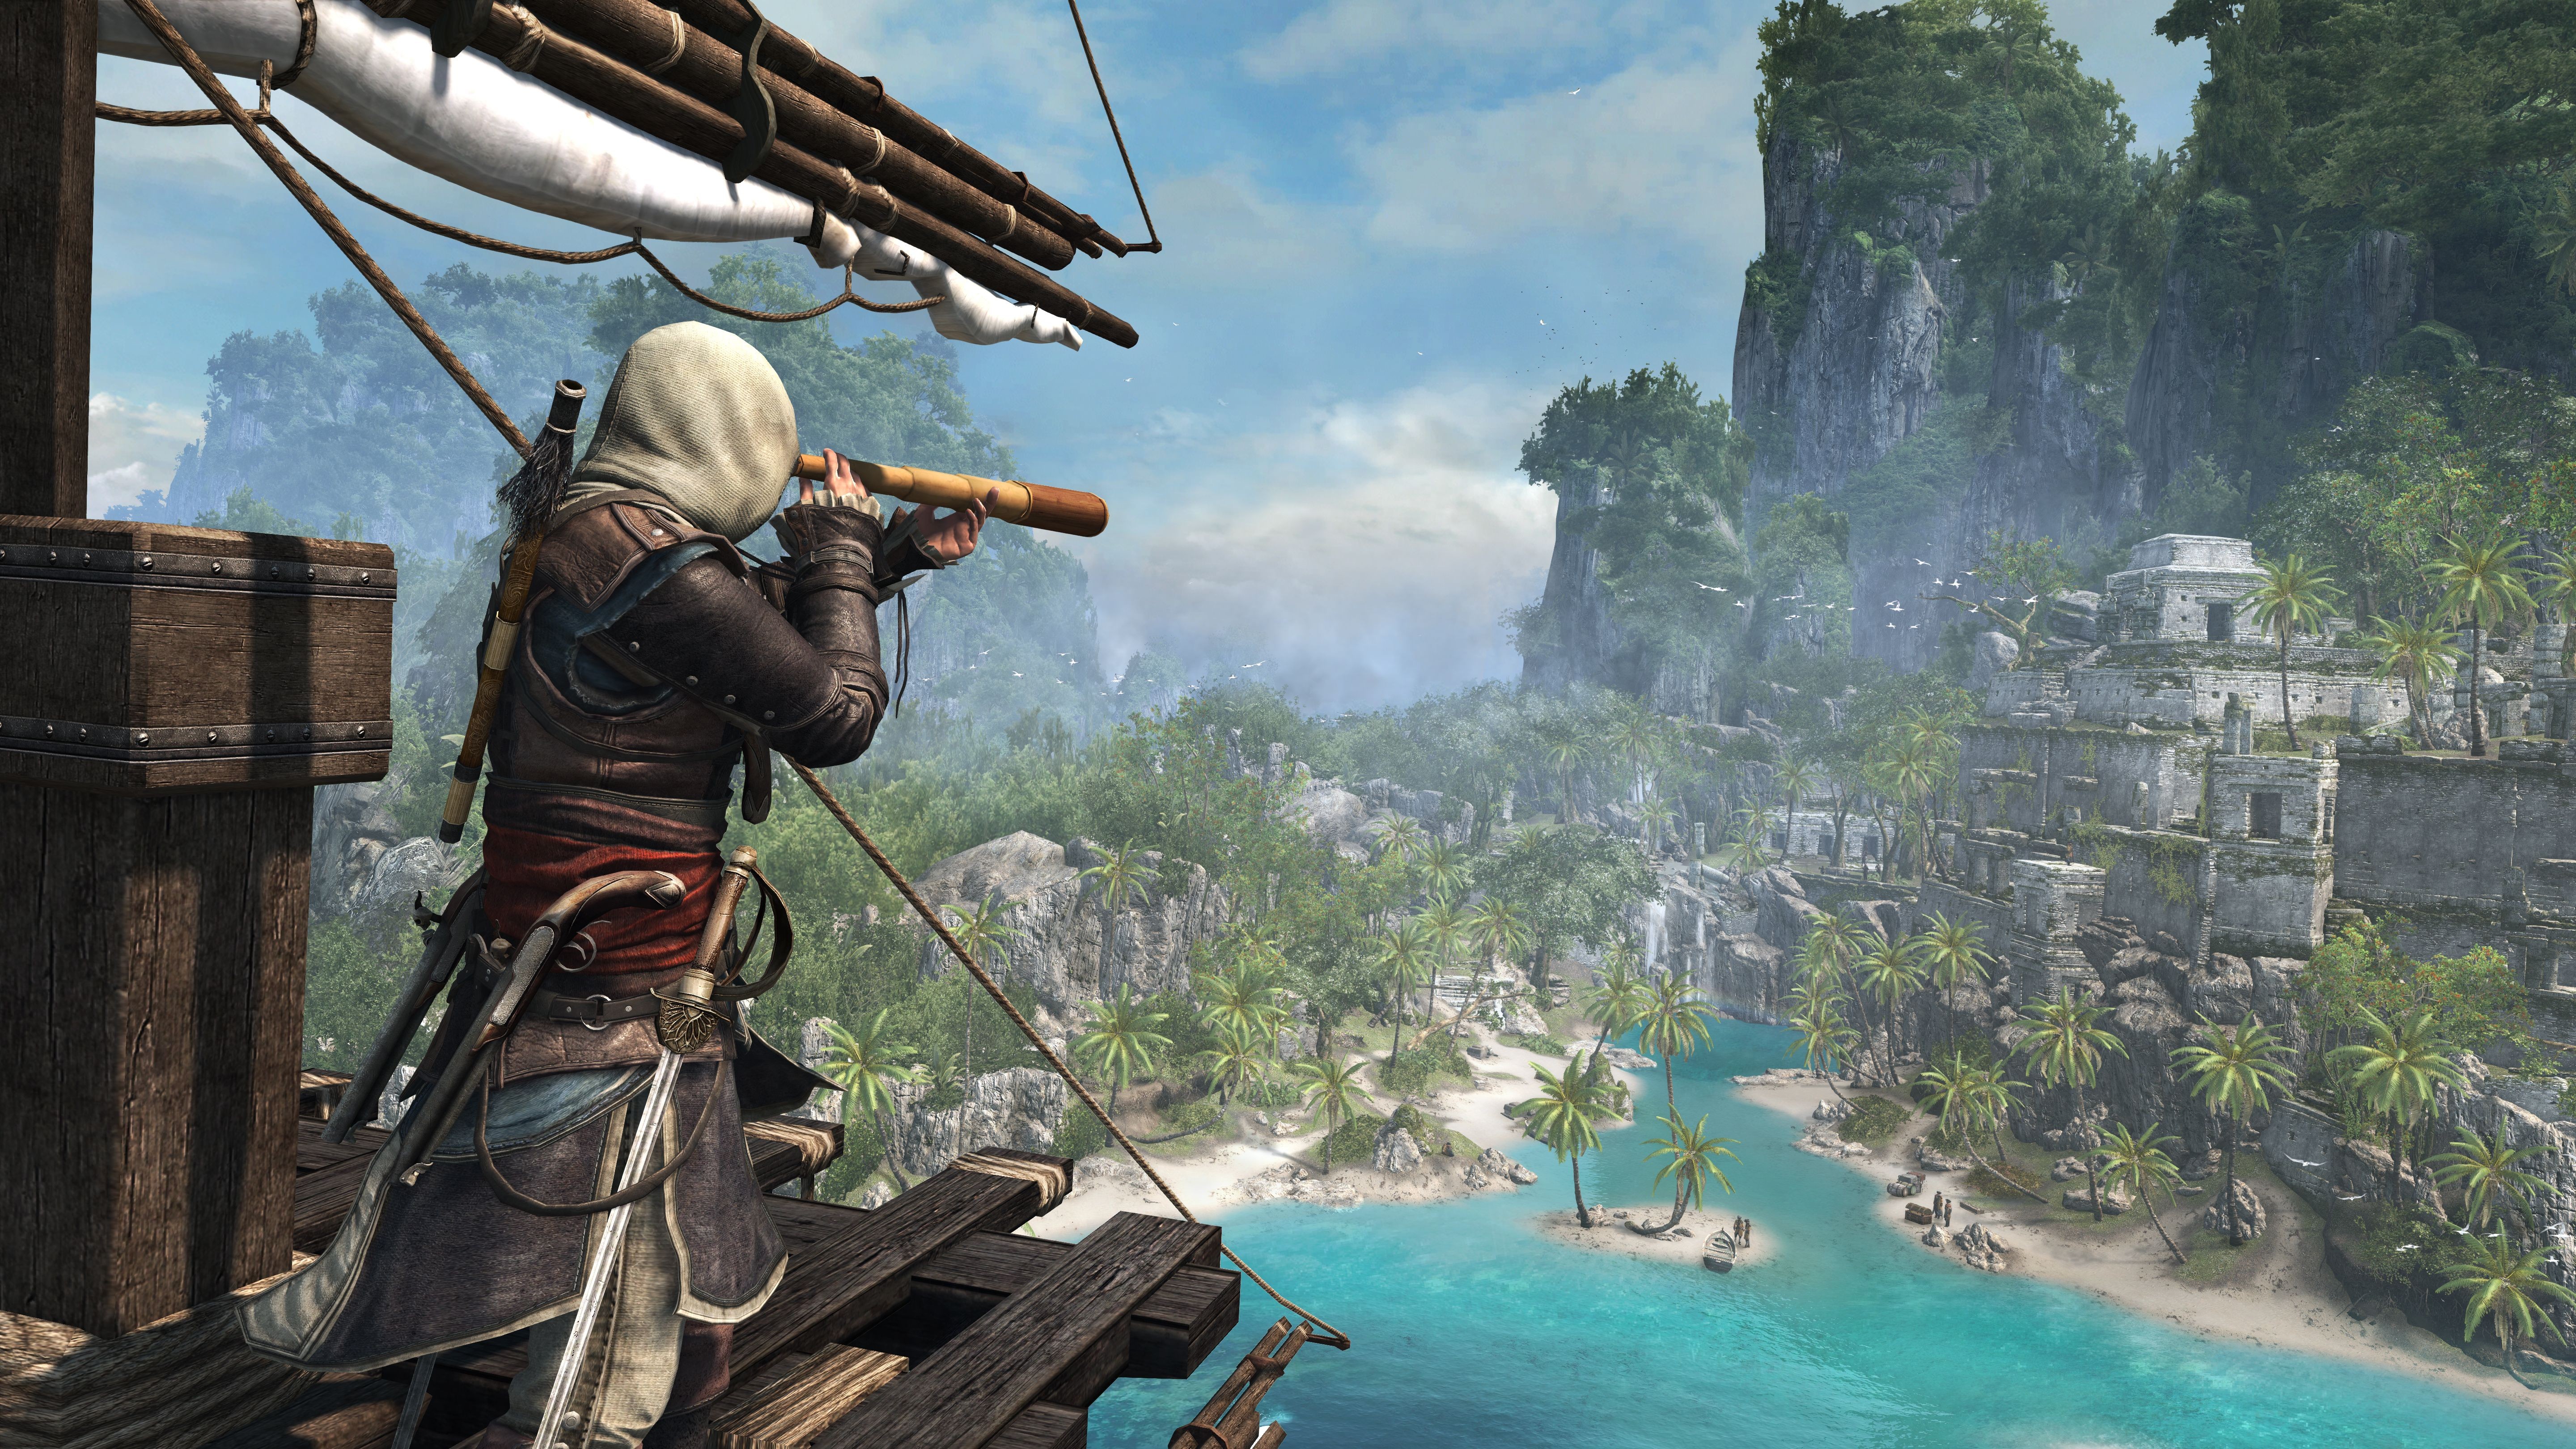 General 5760x3240 Assassin's Creed video games screen shot tropical PC gaming